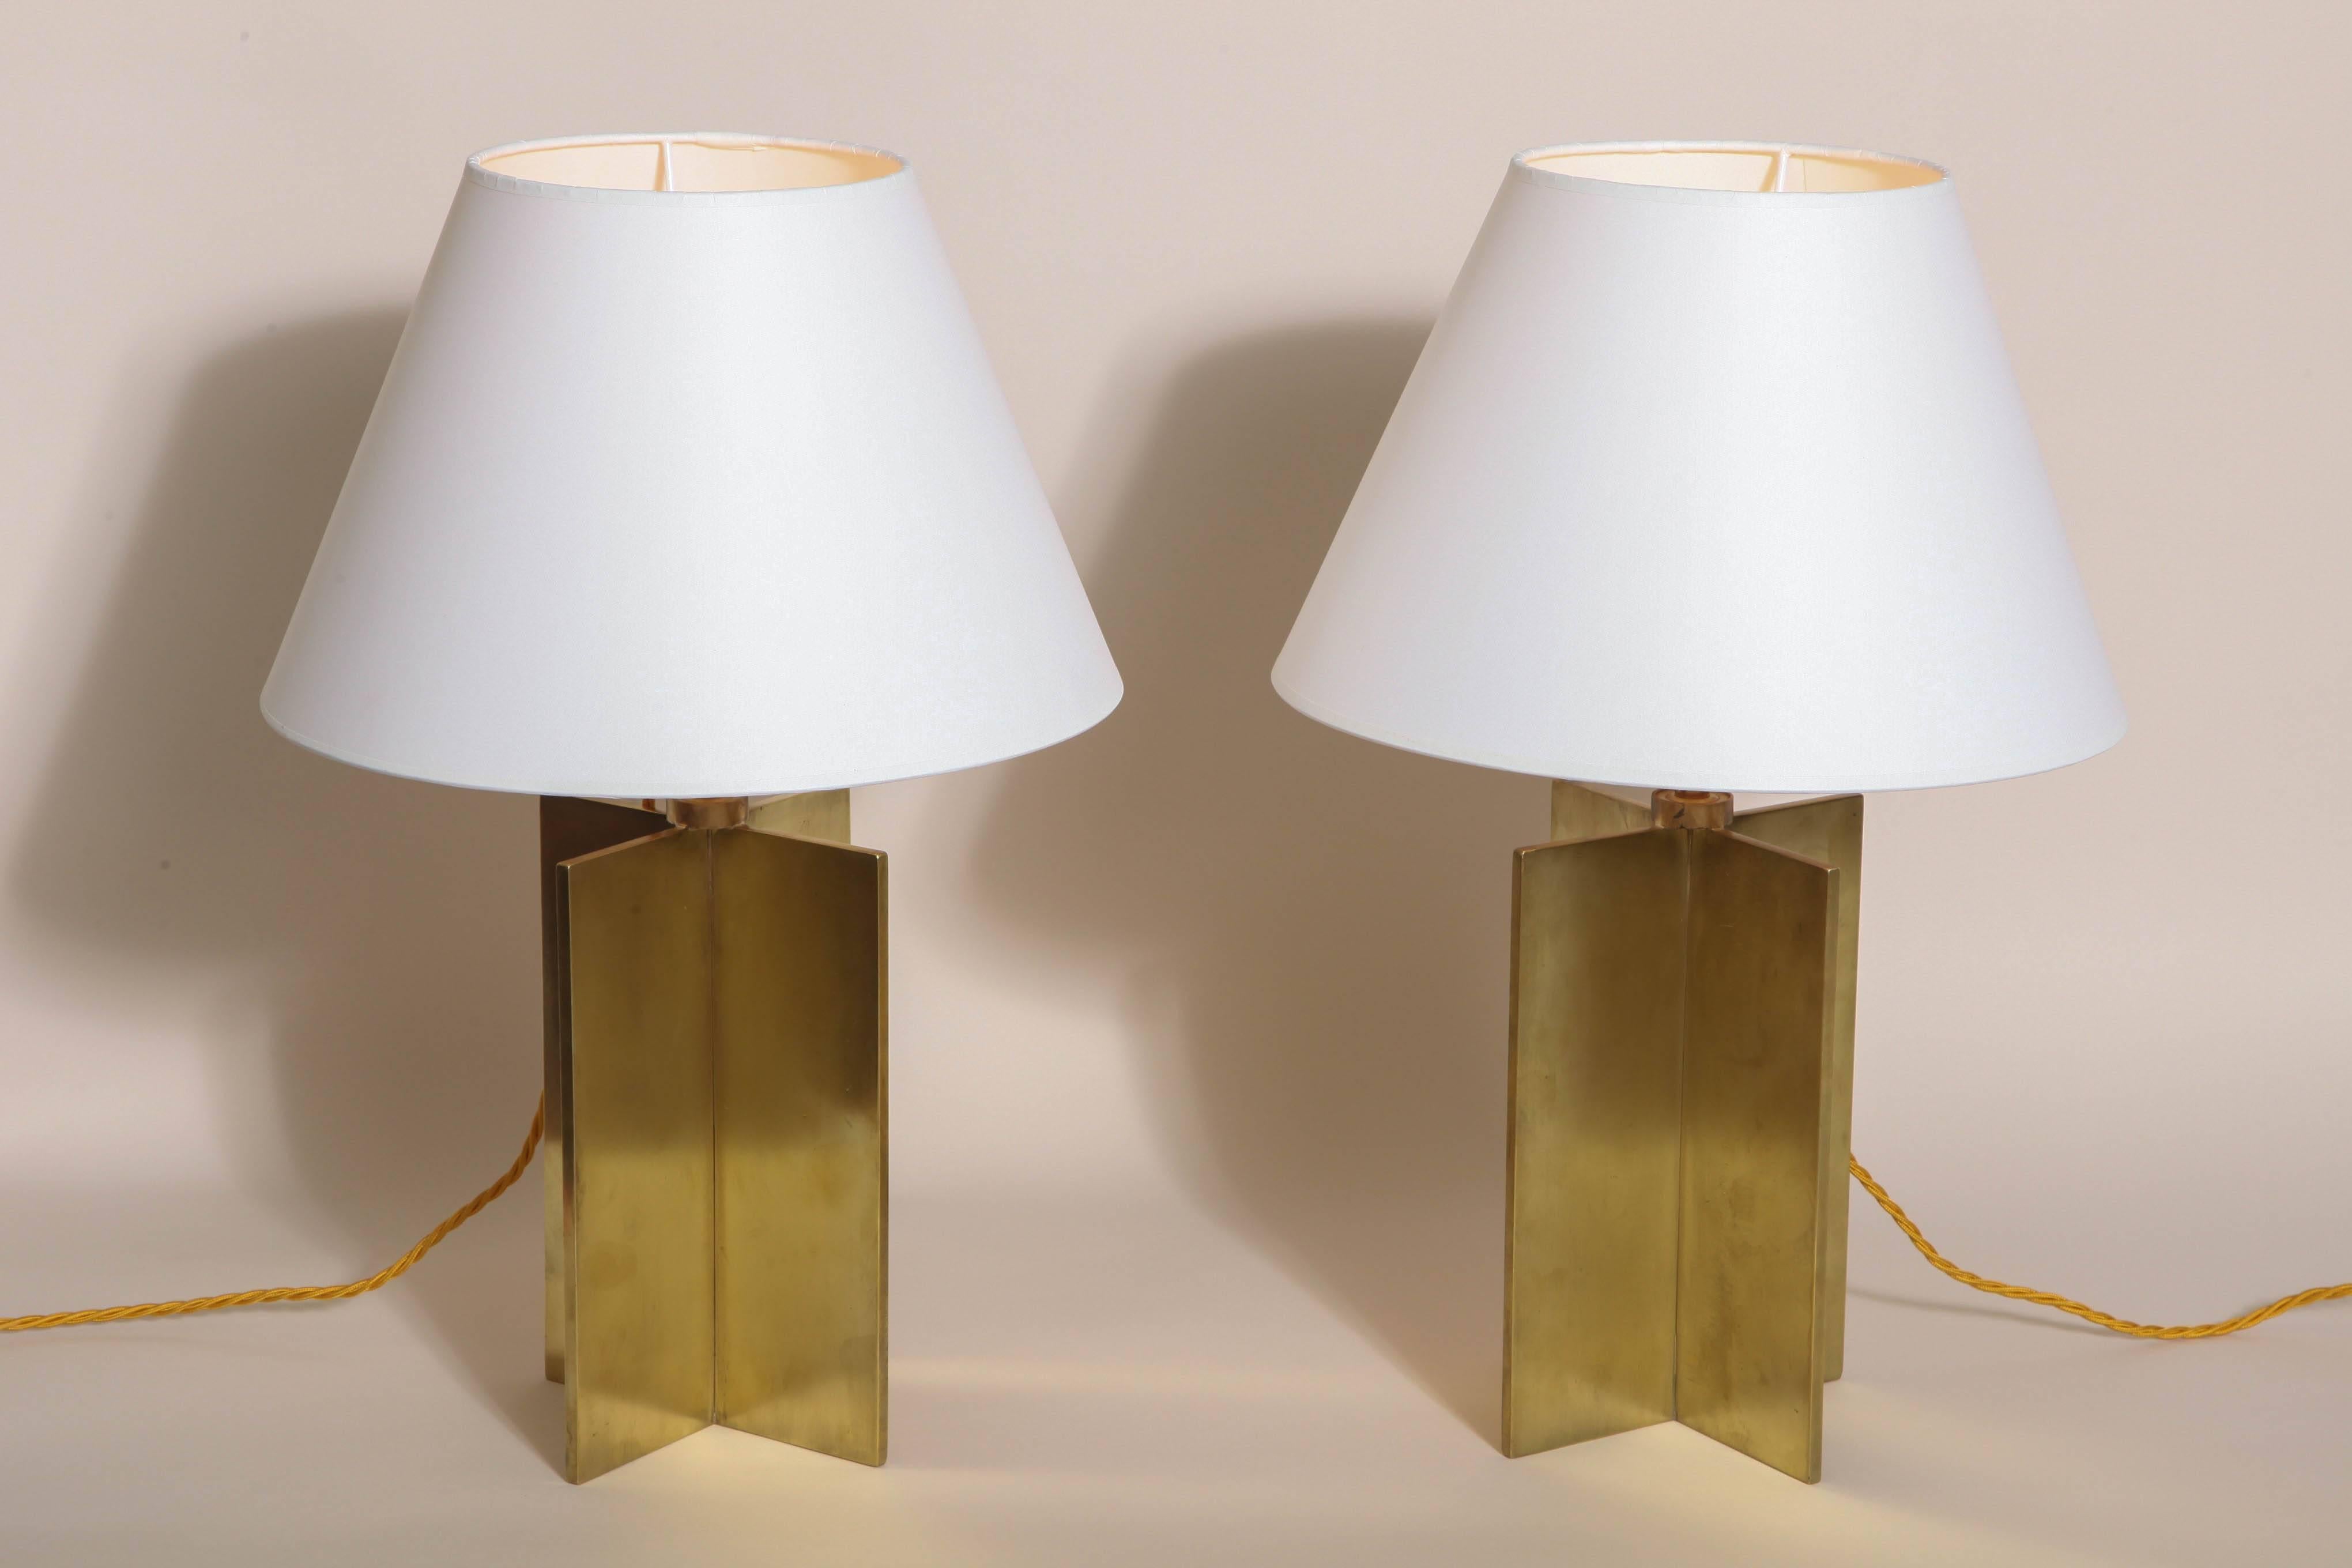 Jean-Michel Frank French Art Deco Pair of 'Croisillon' Table Lamps In Excellent Condition For Sale In New York, NY